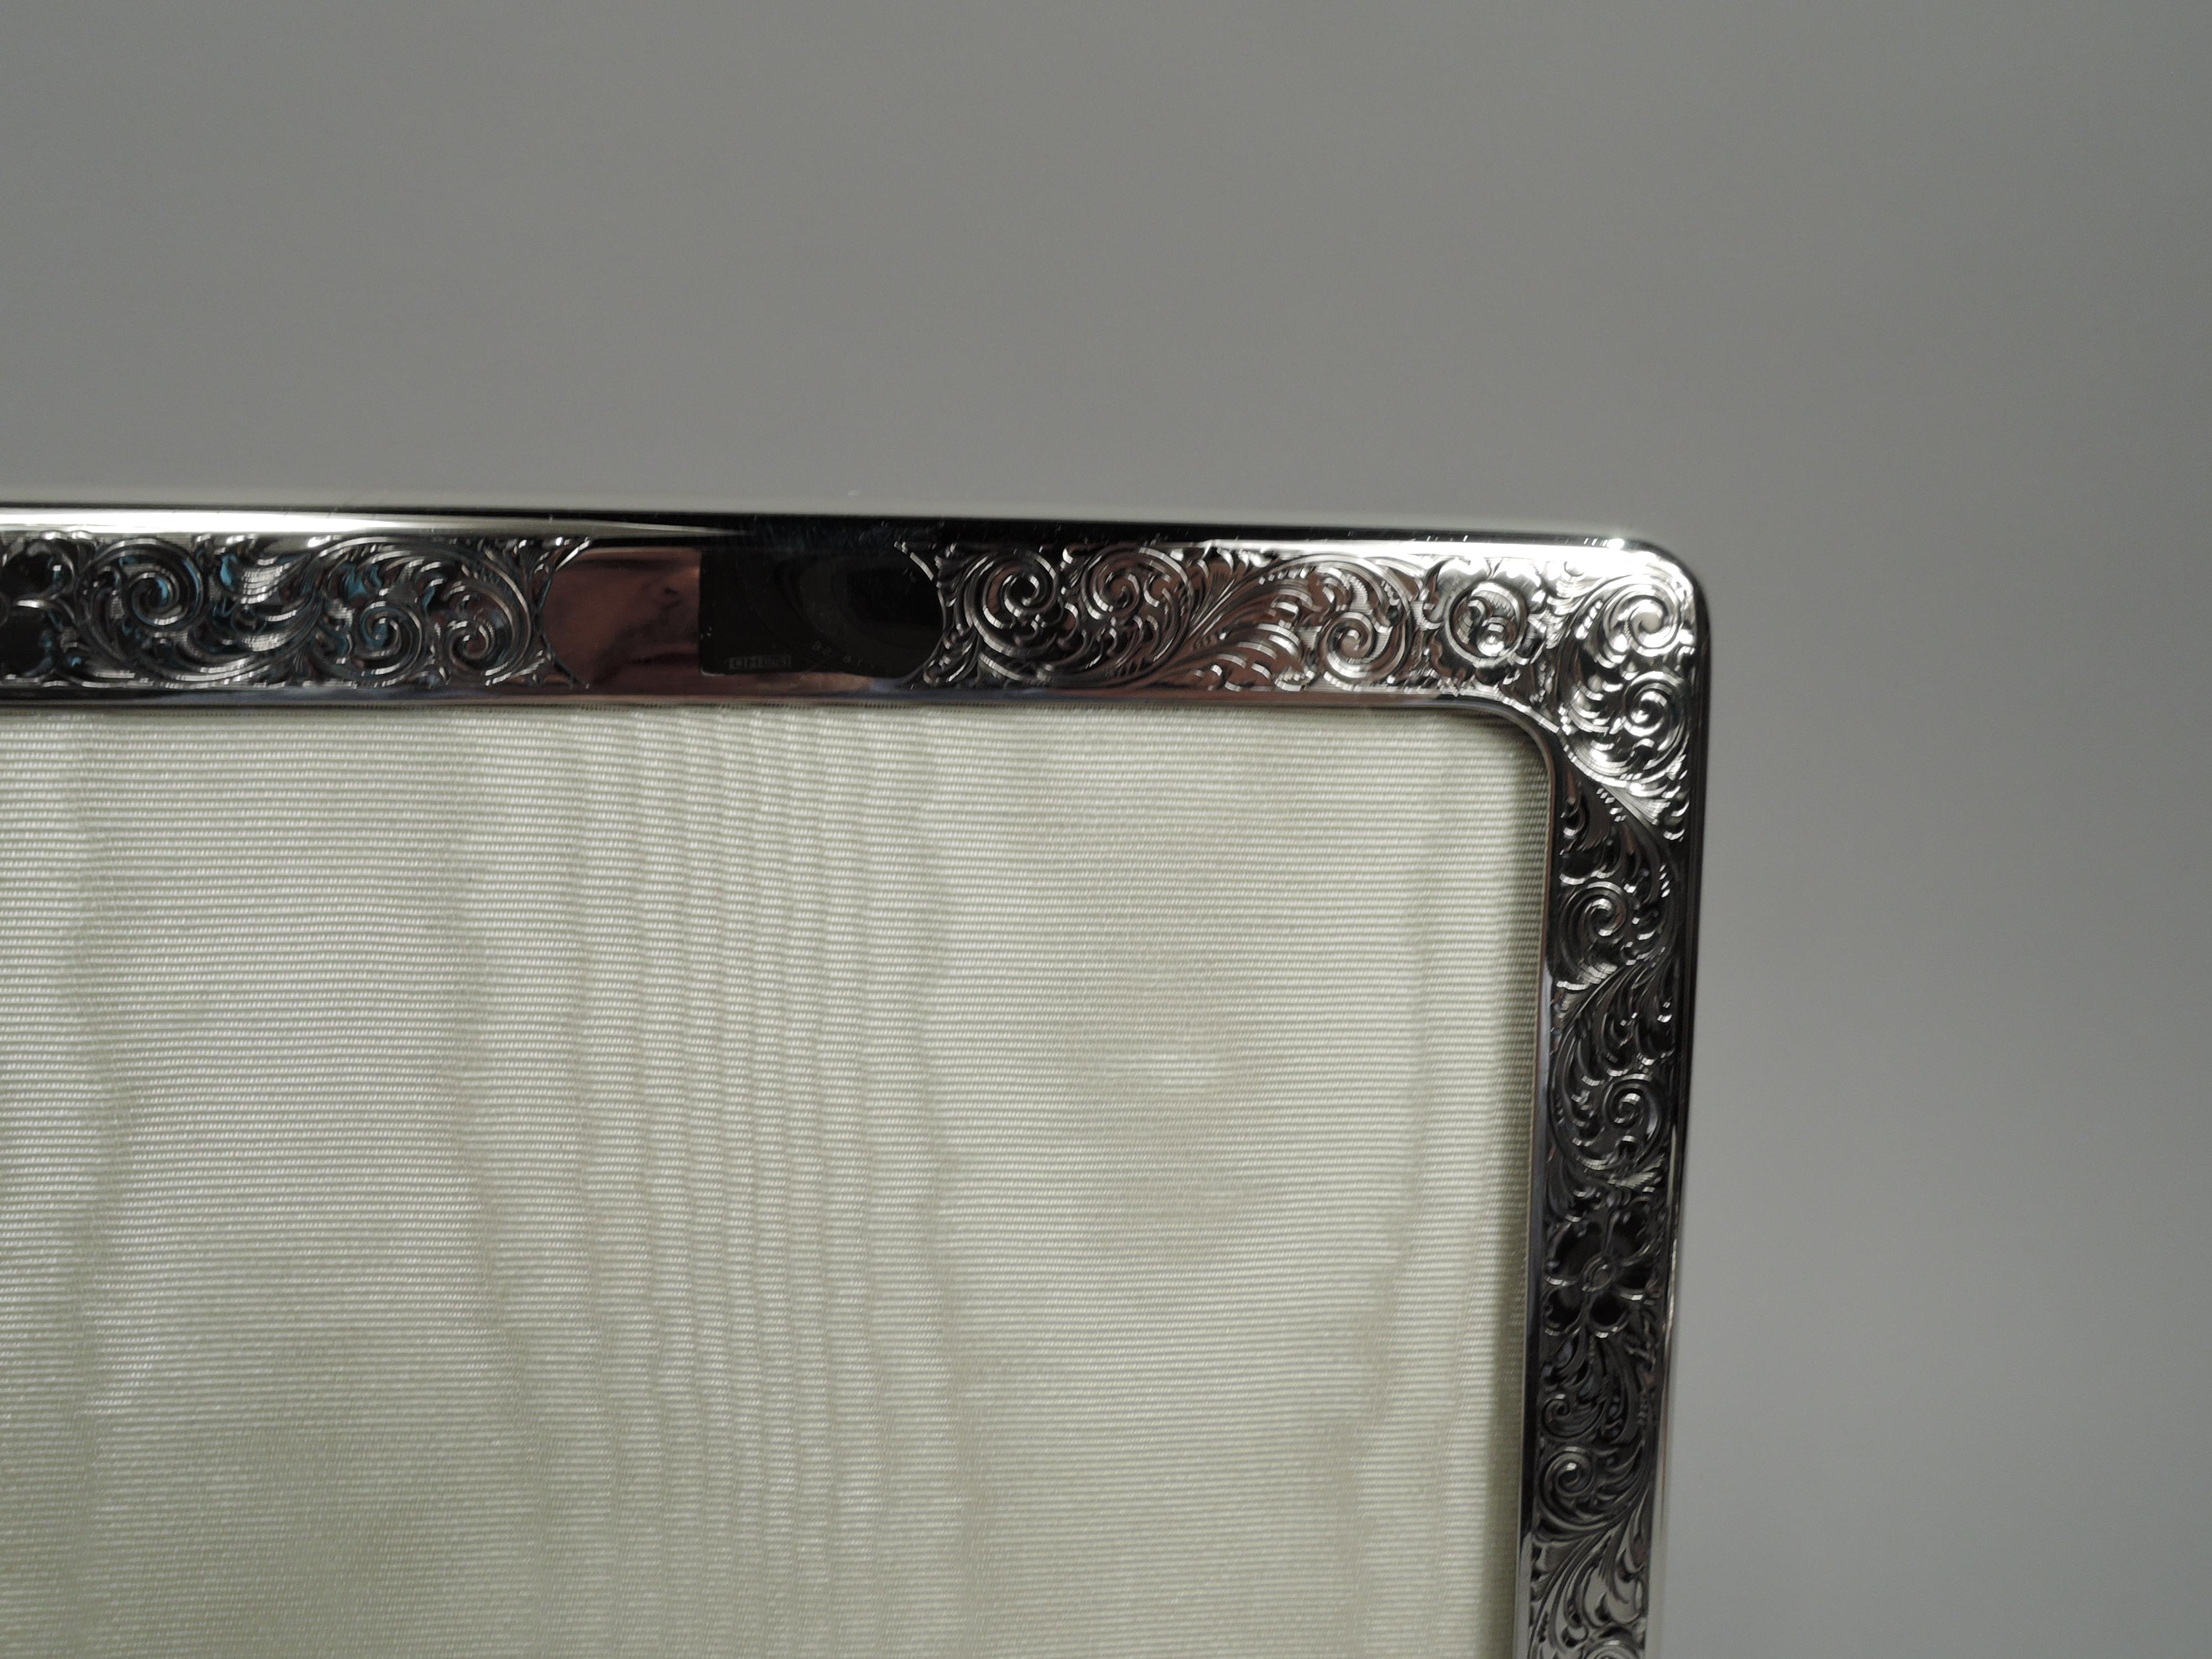 Edwardian Art Nouveau sterling silver picture frame, ca 1910. Rectangular window in surround with curved corners. Front engraved with dense leafing scrollwork and flowers; tubular cartouche (vacant). Sides plain. With glass, silk lining, and velvet